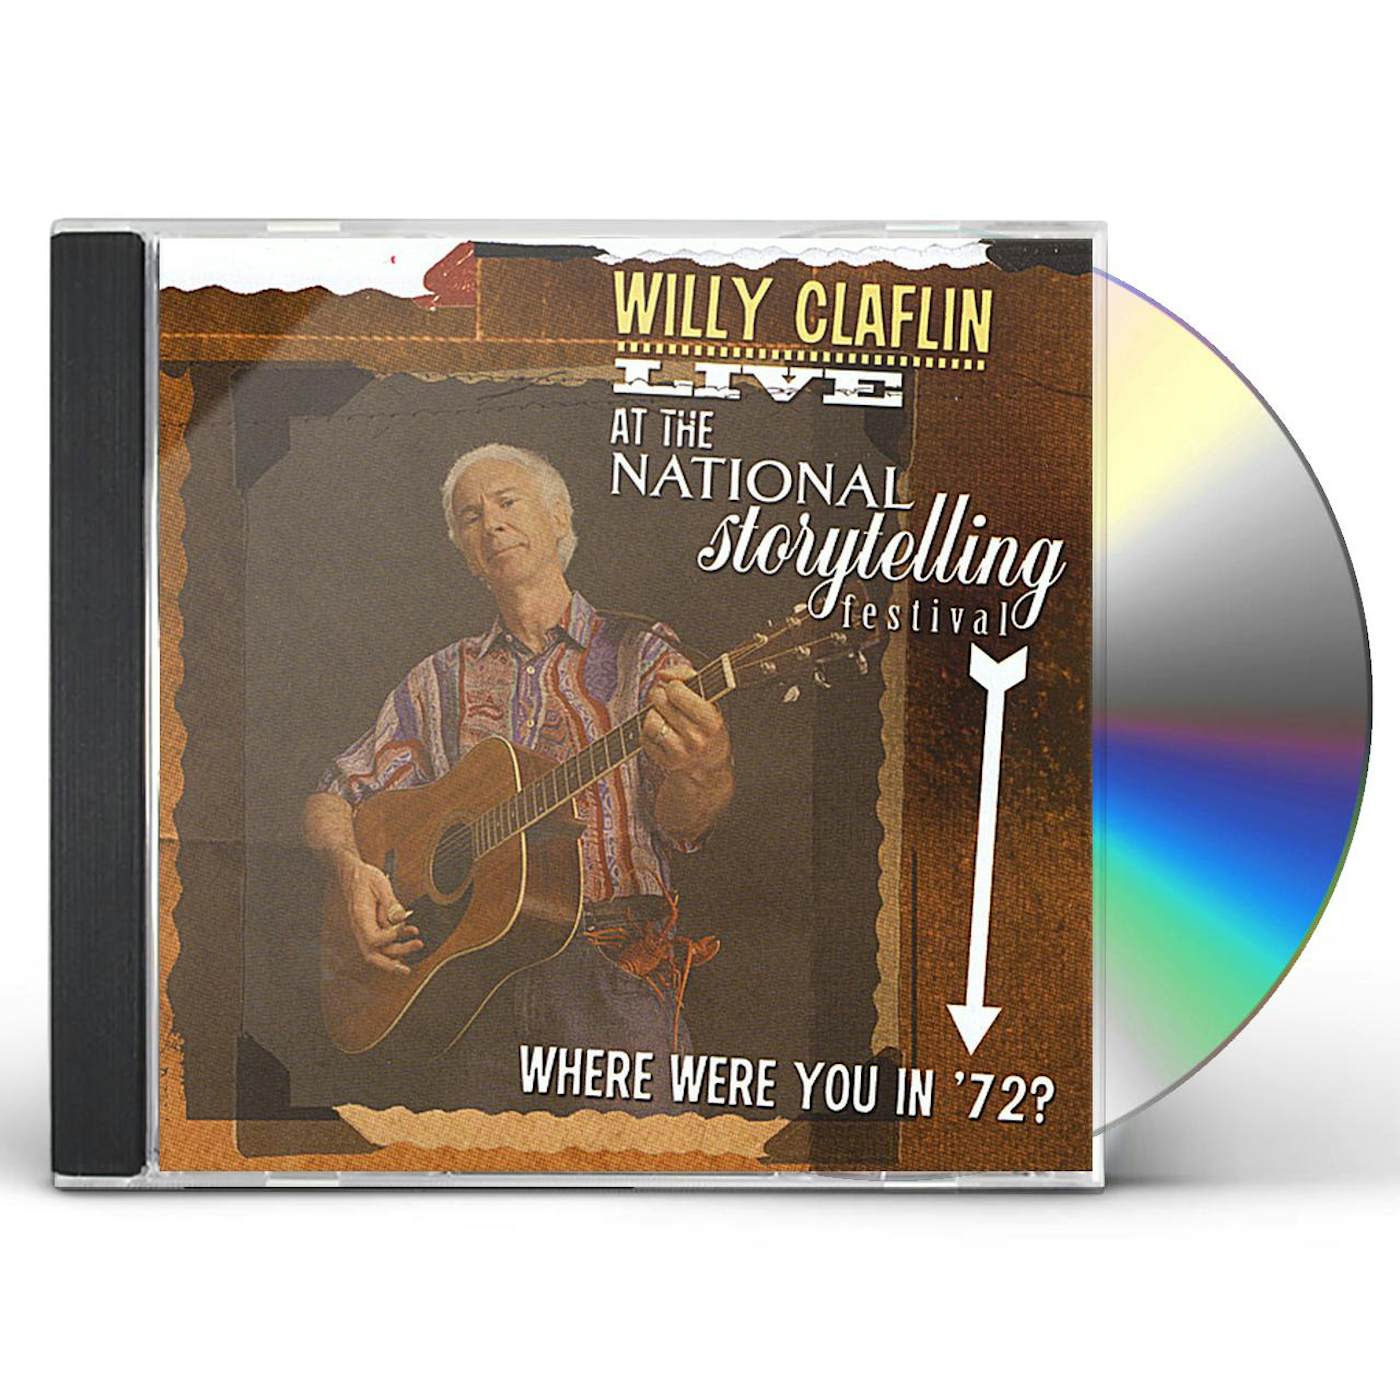 Willy Claflin WHERE WERE YOU IN 72? CD